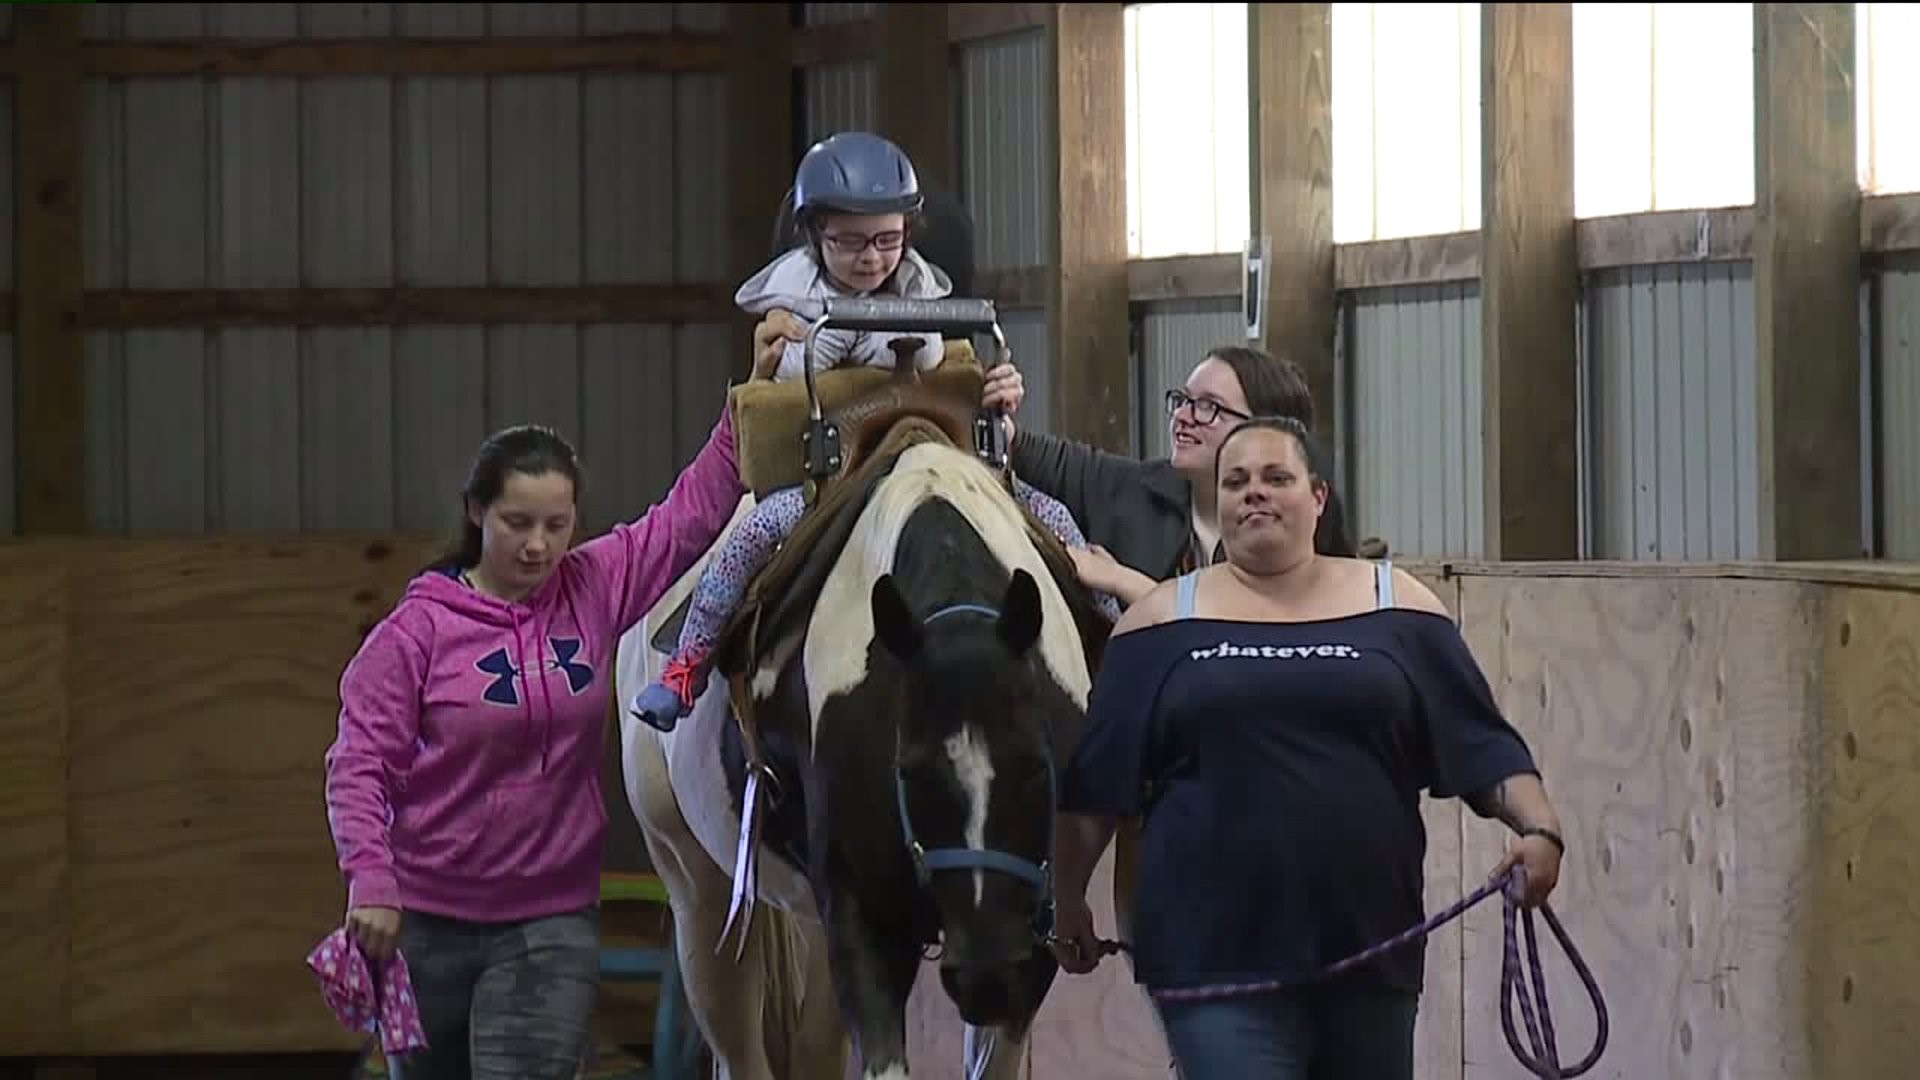 Therapy Riding Center Hosts Open House